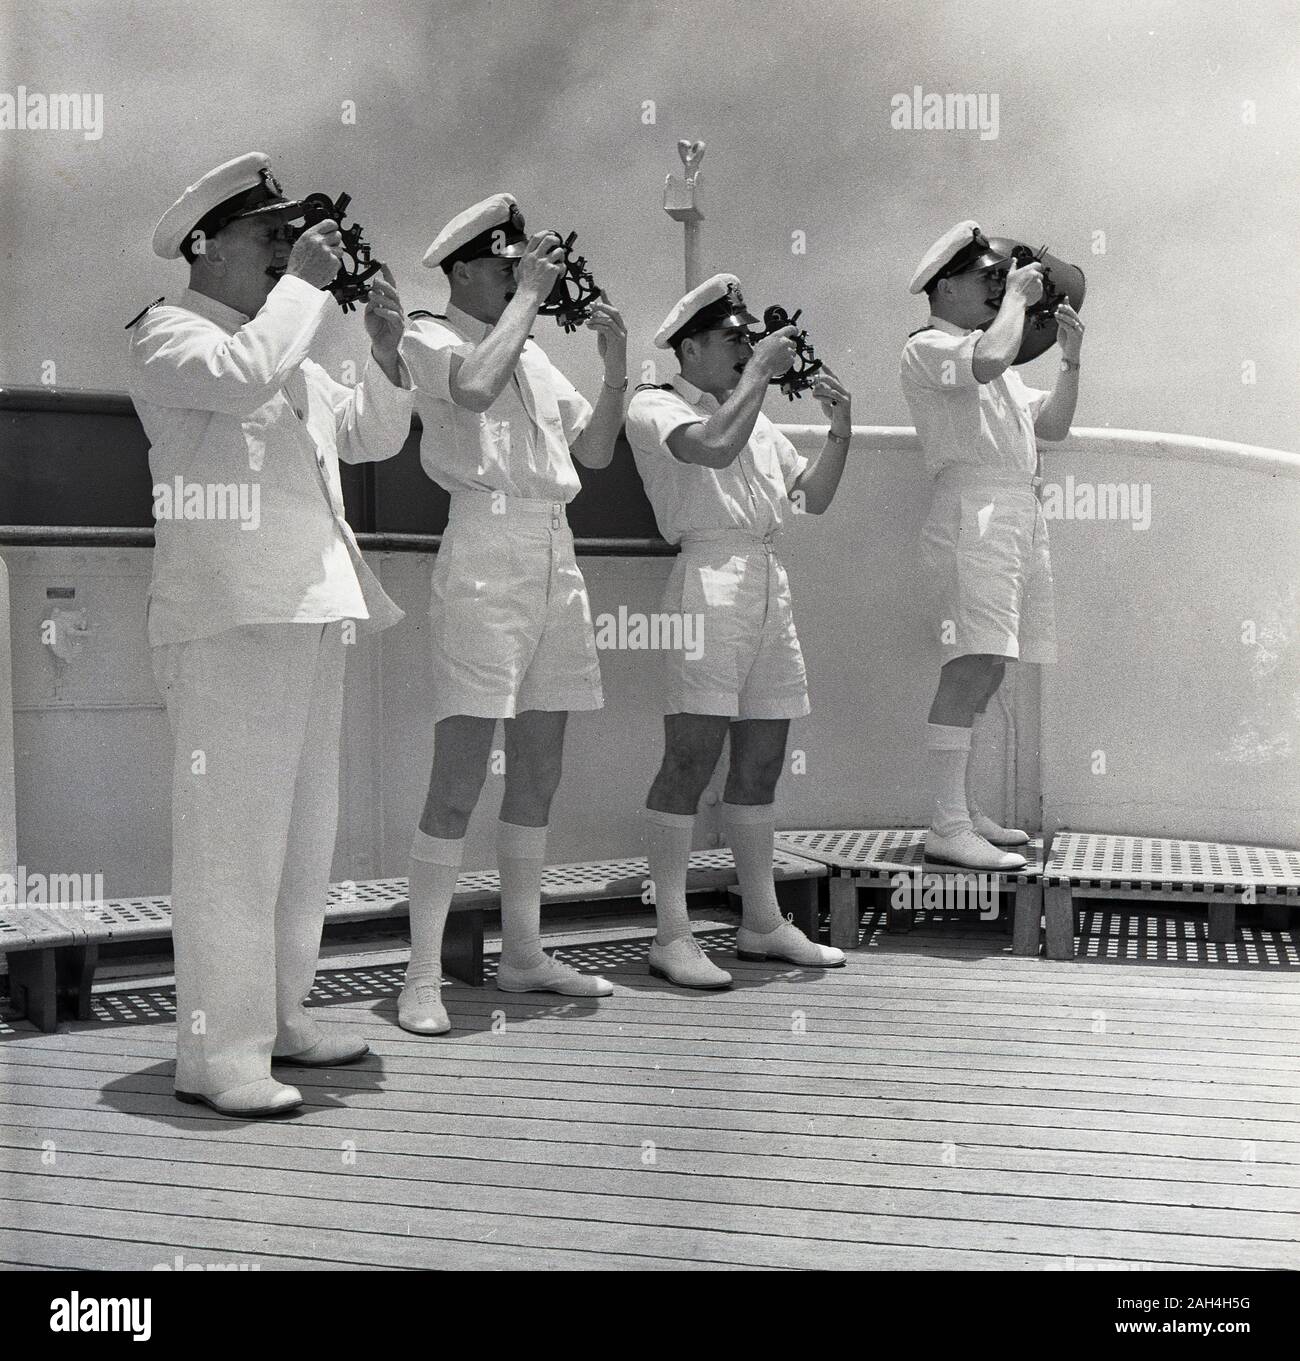 1950s, historical, a captain and three uniformed crew standing outside on the deck of their steamship using traditional measuring instruments, sextants, to navigate the ship's course. Sextants are maritime measuring instruments used to determine the angle between the horizon and a celestial body such as the sun, moon or a star. Stock Photo